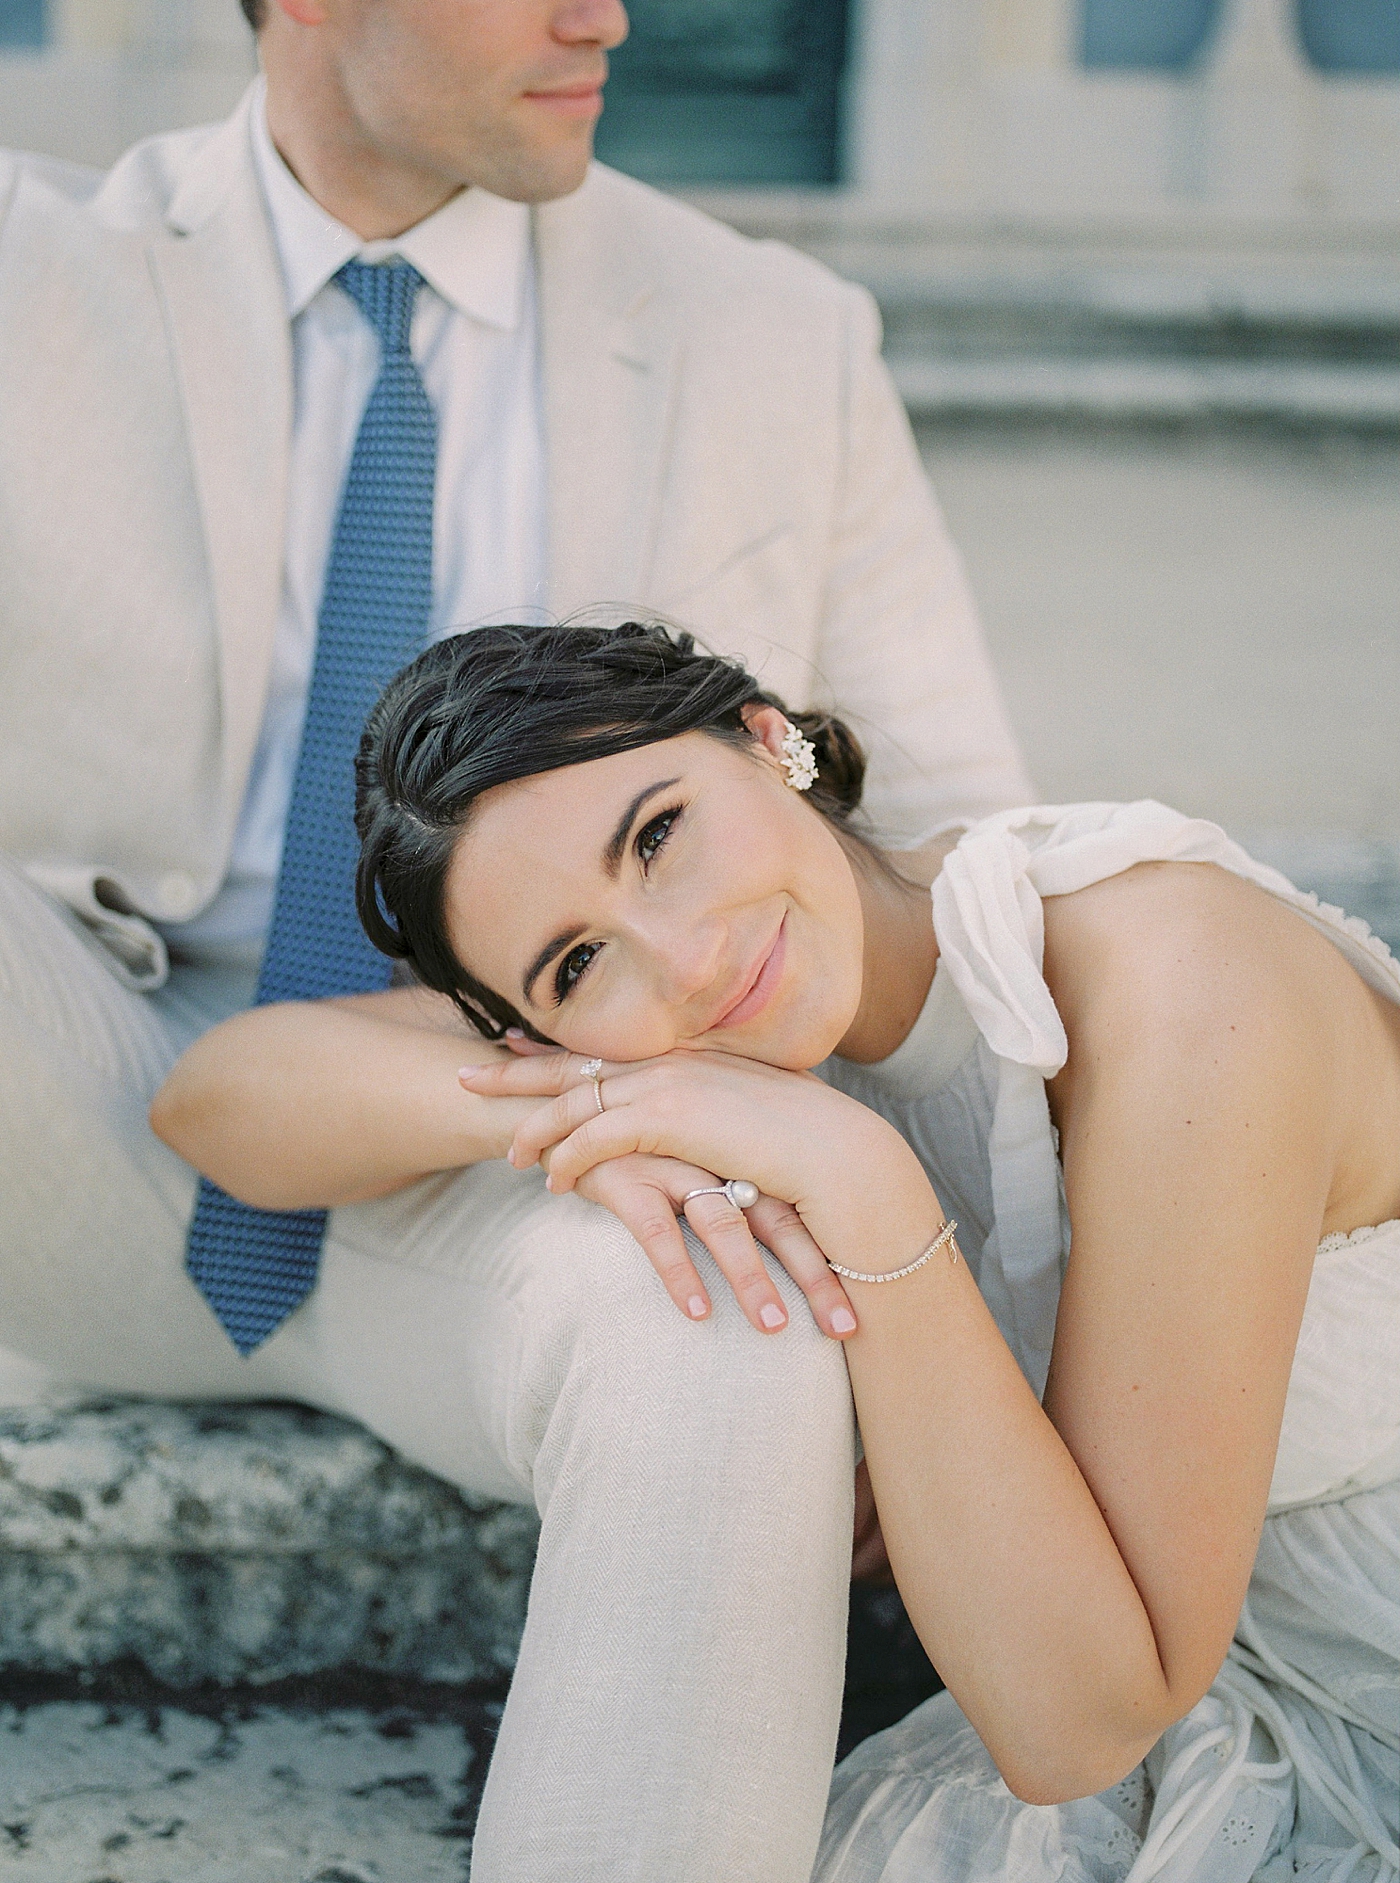 Woman with dark hair leaning on her fiancé's knee | Photo by Diane Sotero 